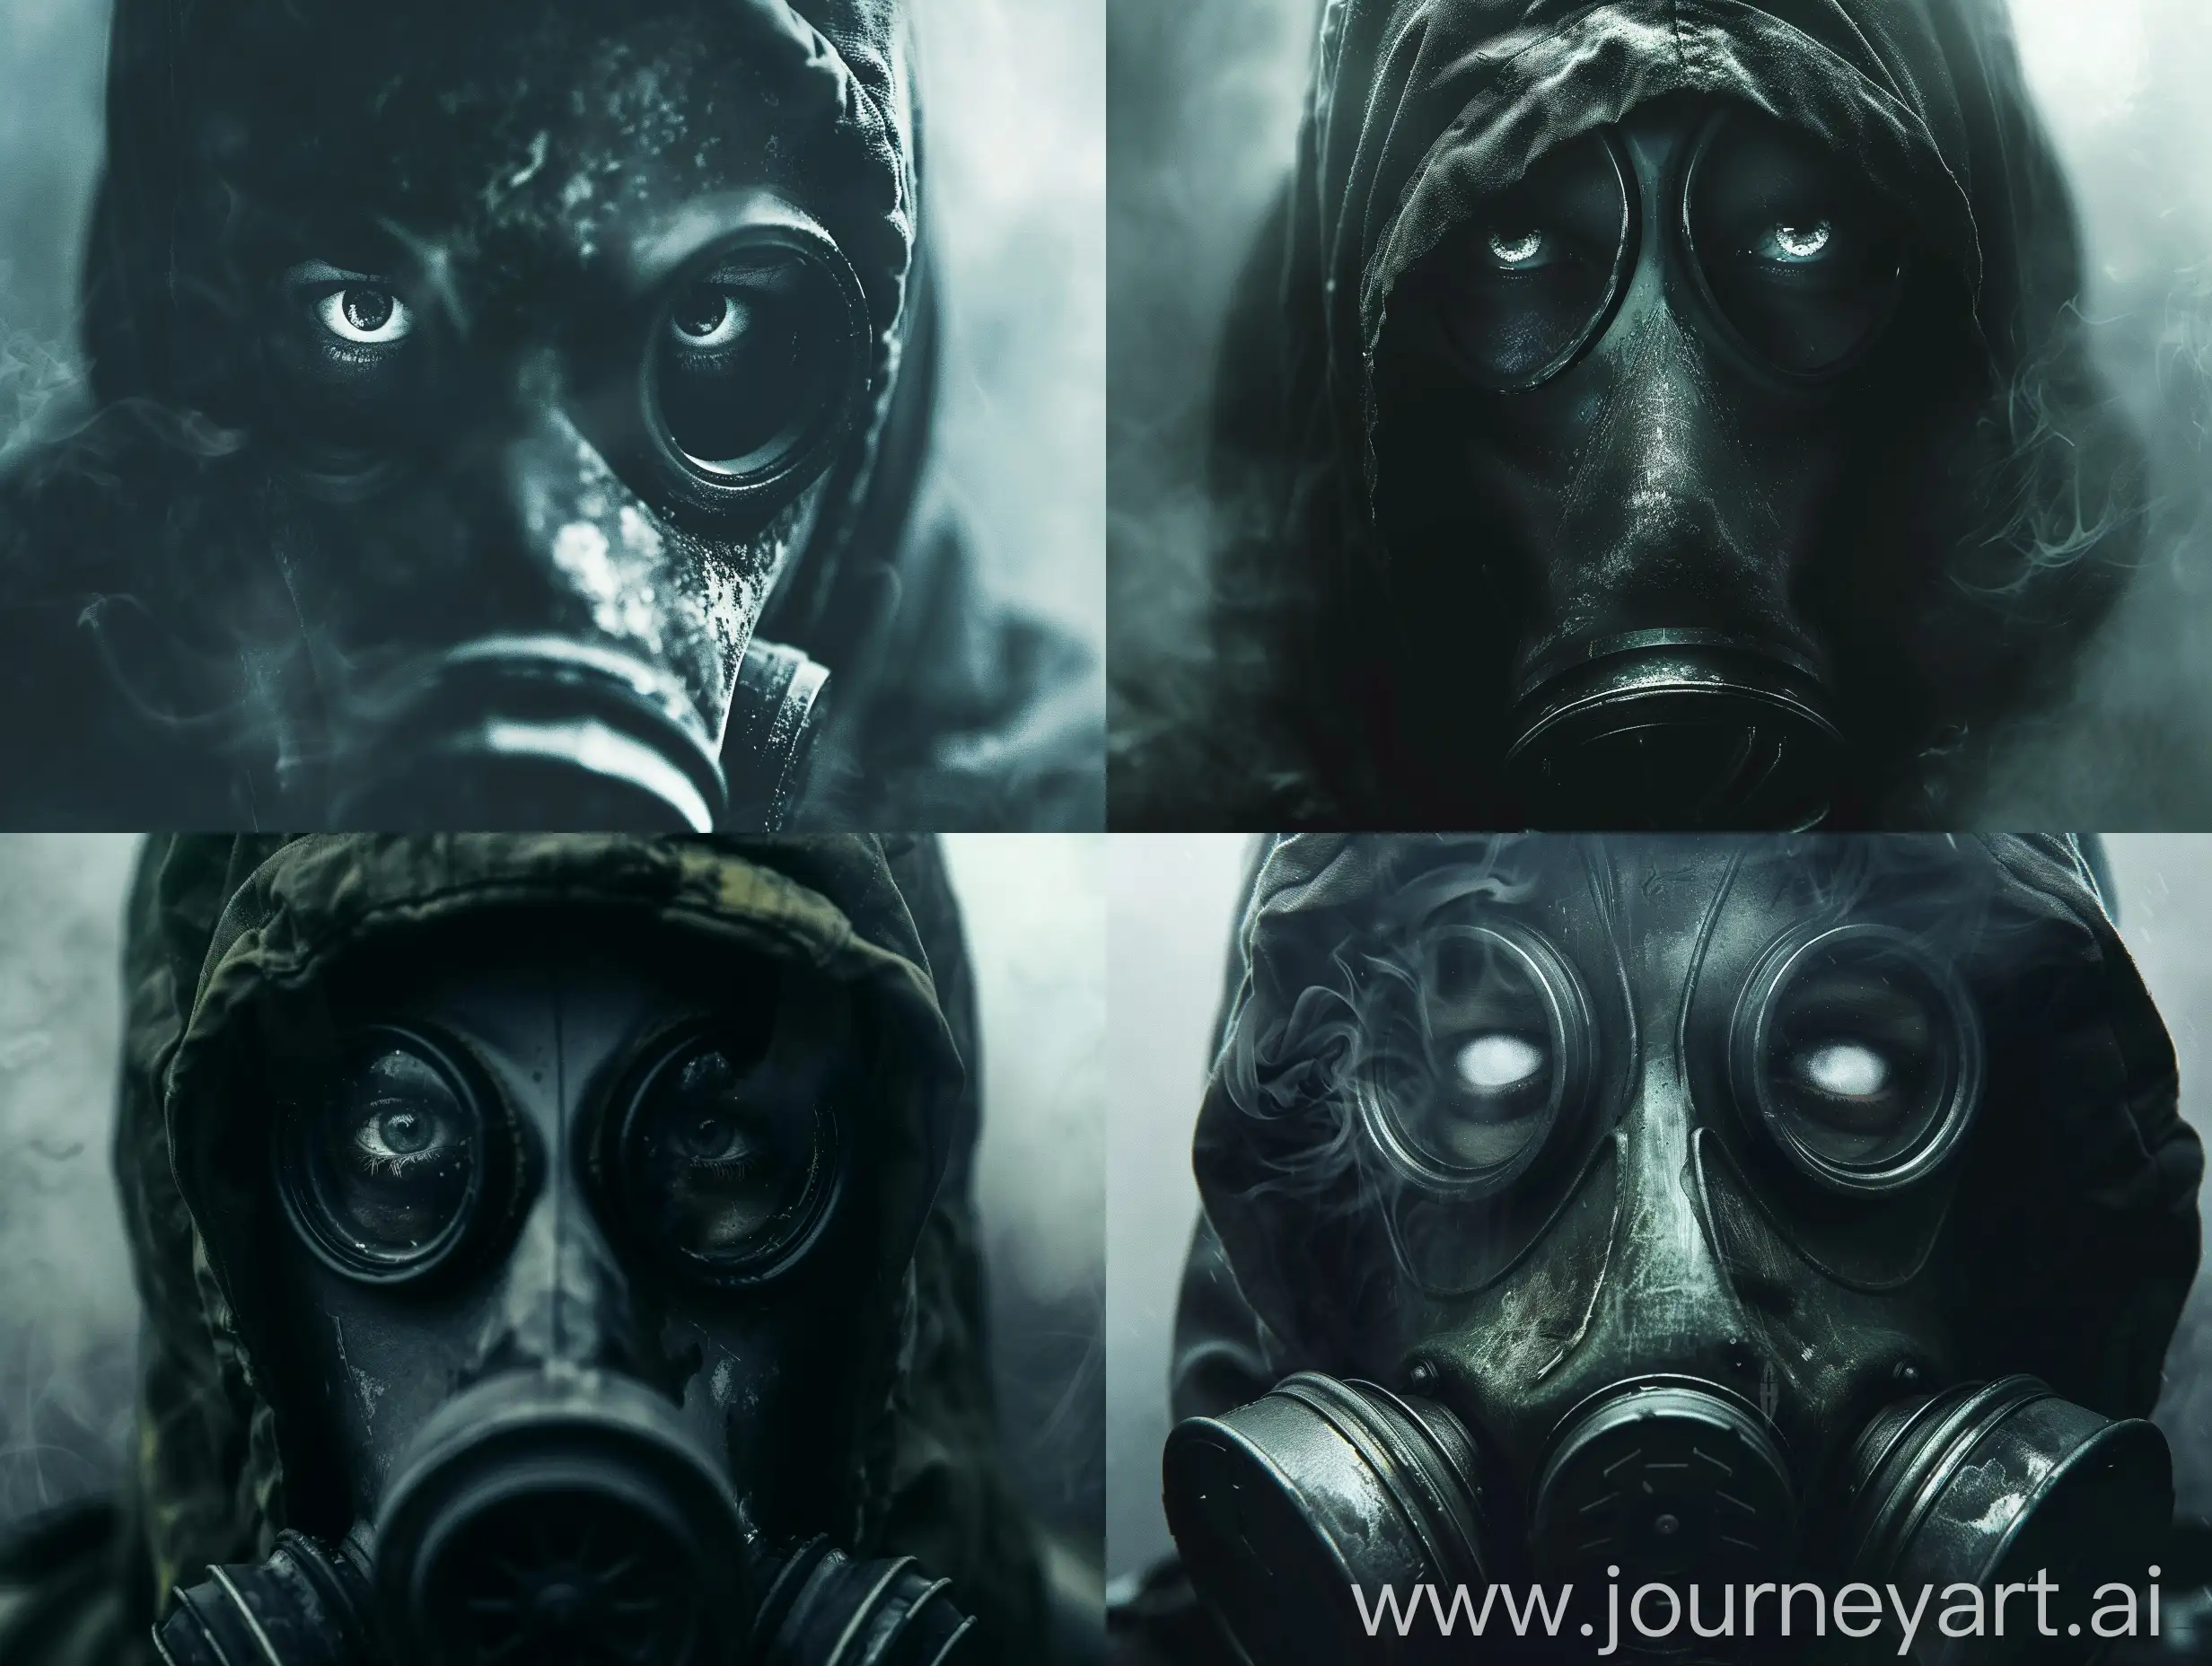 A picture of a stalker's face wearing a gas mask. Chernobyl. Cinematic. Epic. Close up. Obscure atmosphere. abstract. white eyes